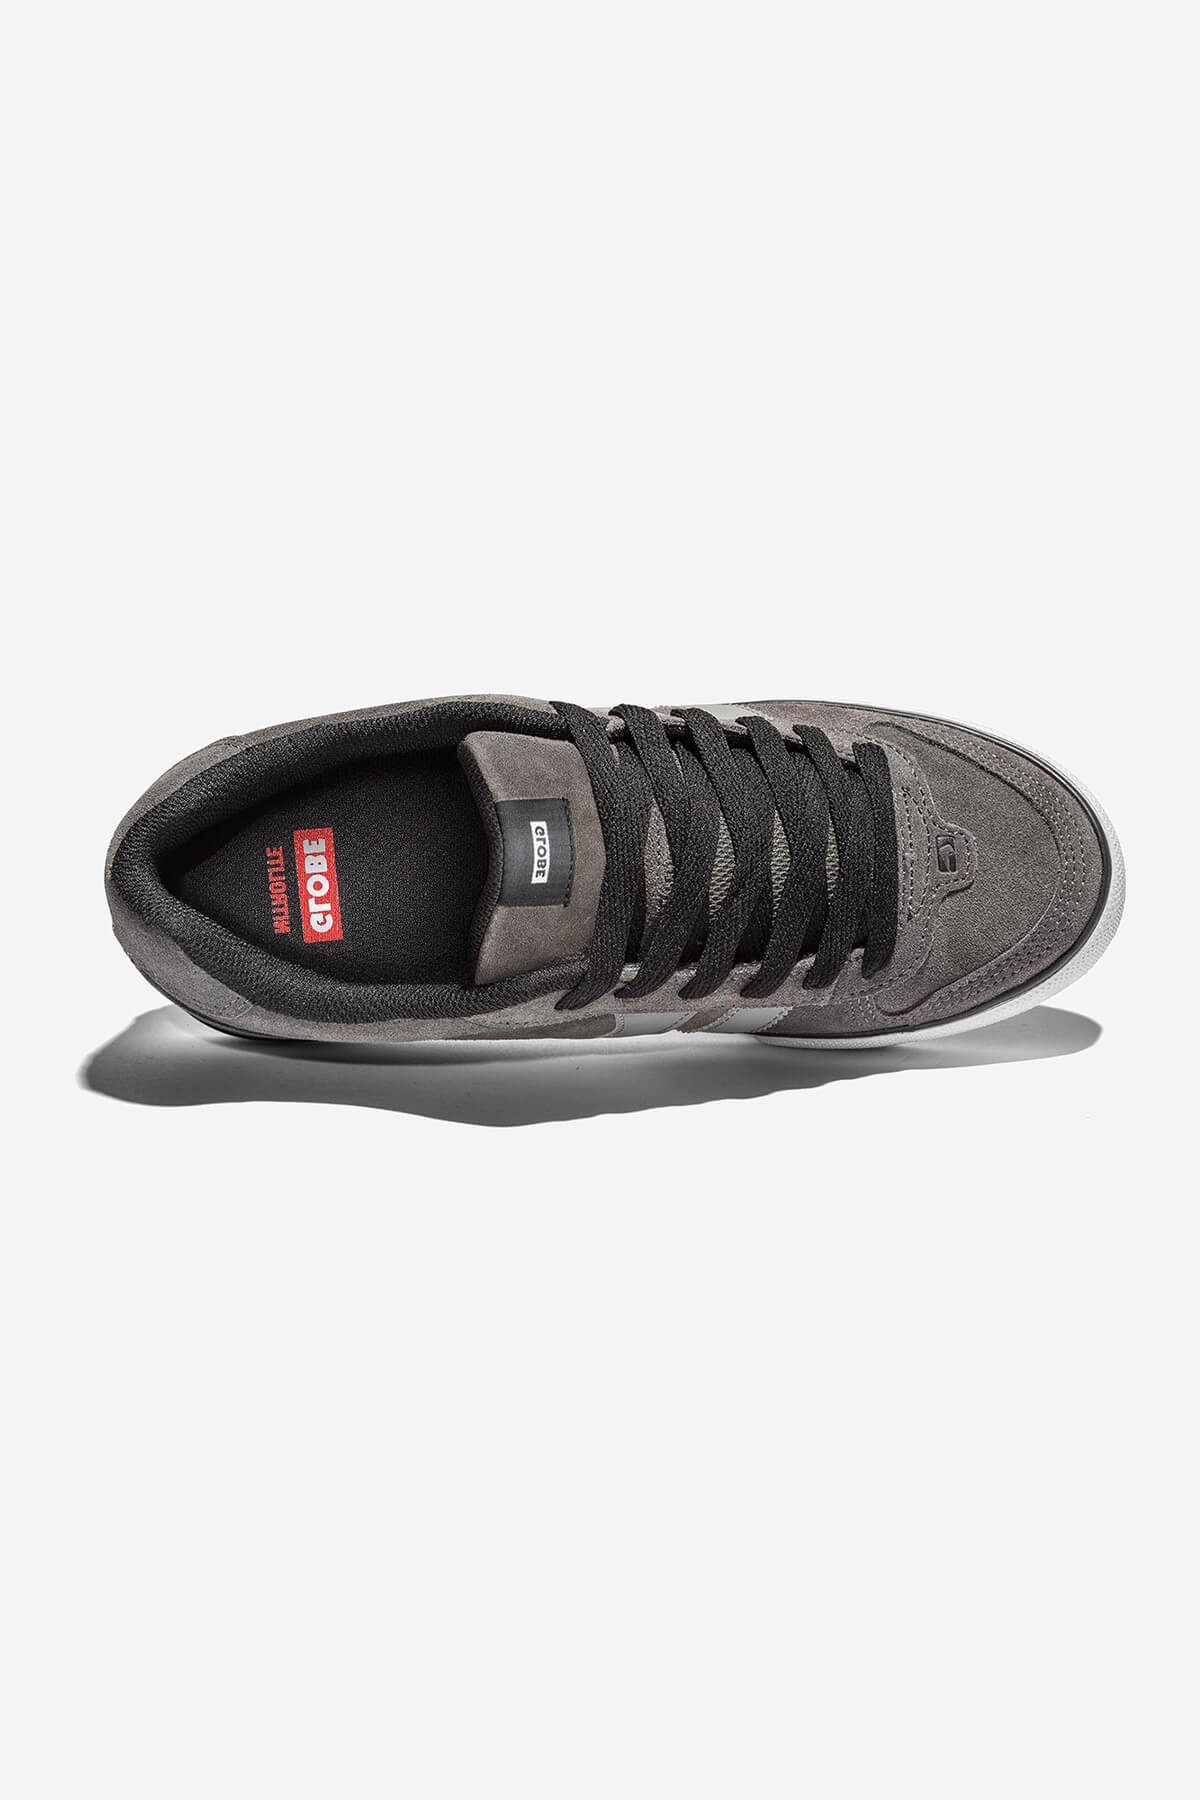 encore-2 charcoal gris skateboard chaussures